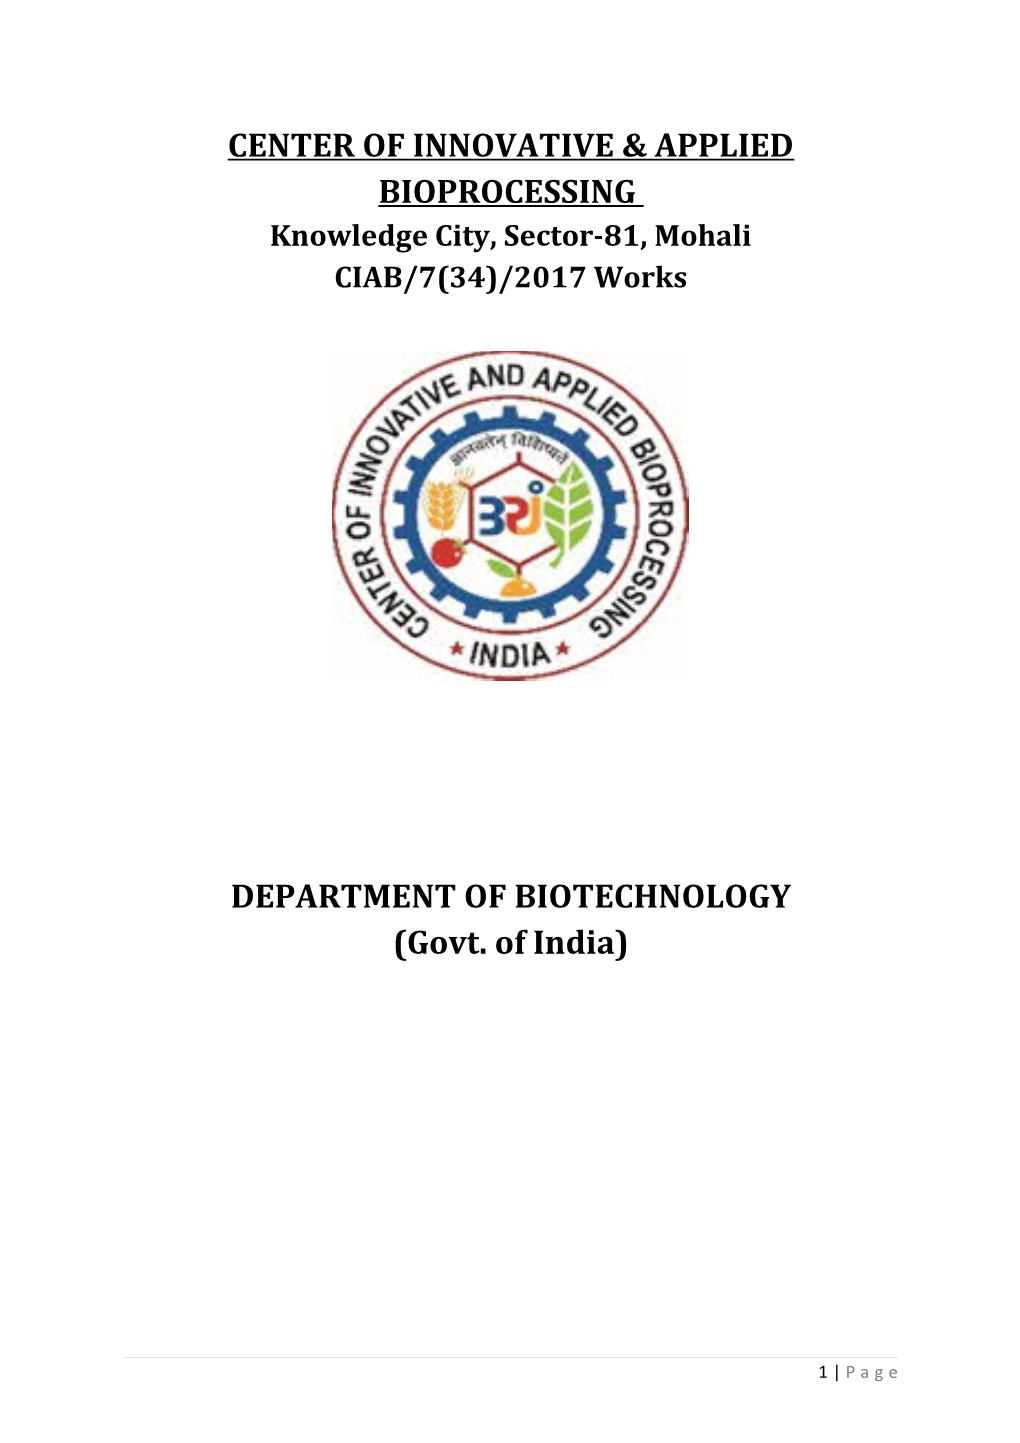 Center of Innovative & Applied Bioprocessing s1